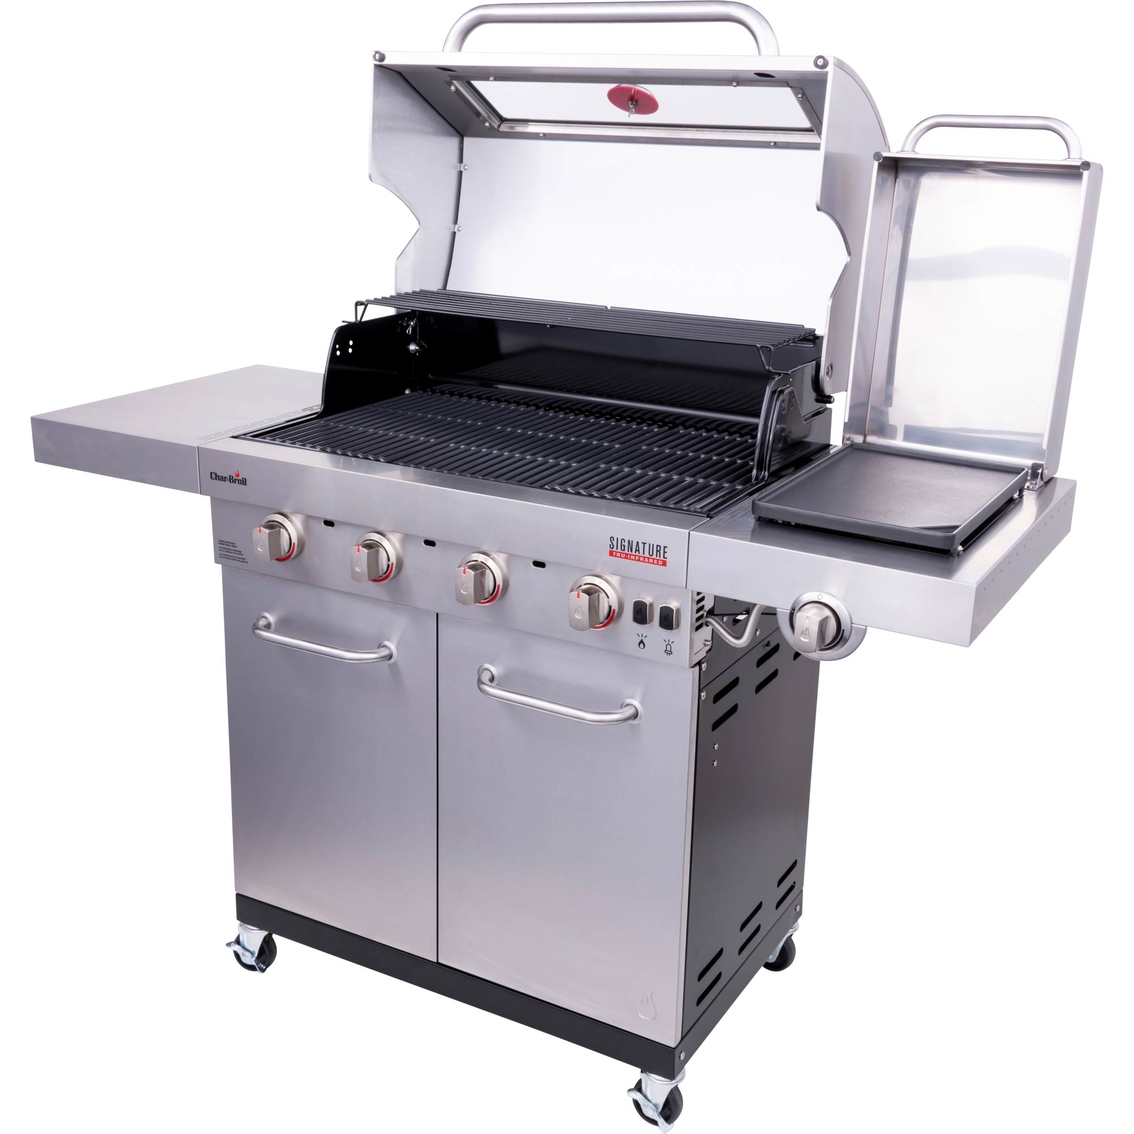 Char-Broil Signature Series TRU-Infrared 4-Burner Gas Grill - Image 3 of 4